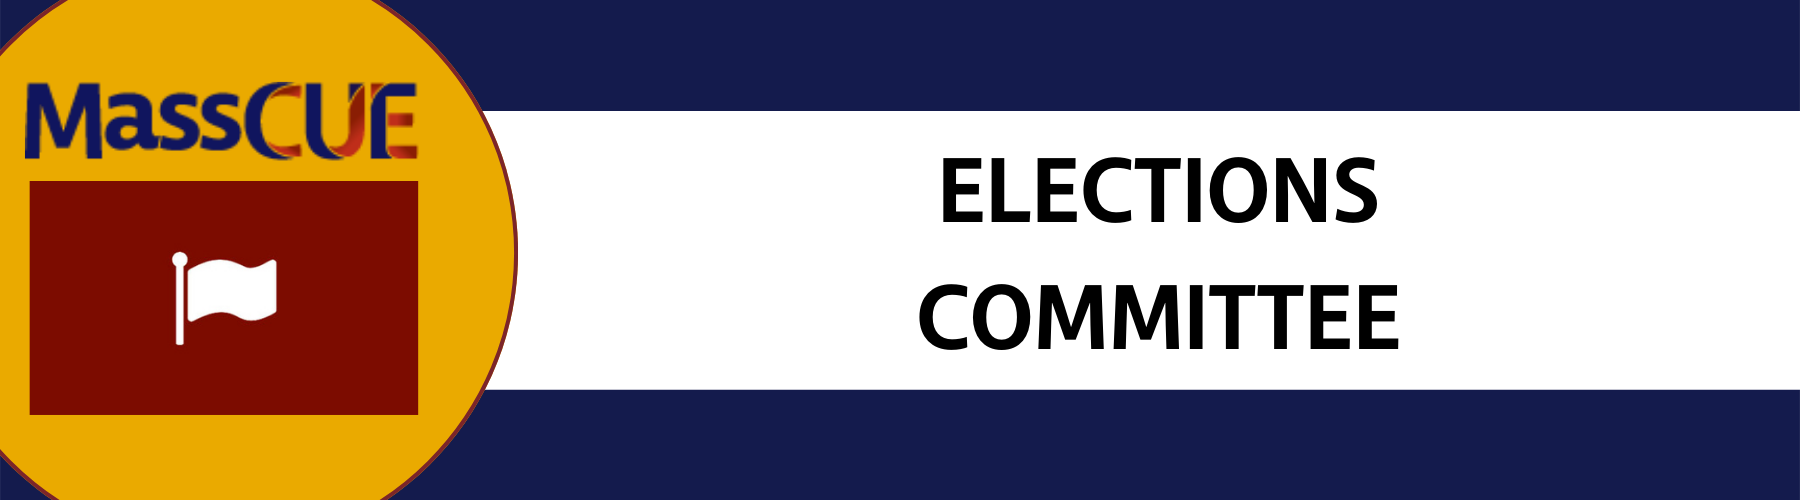 Elections Committee